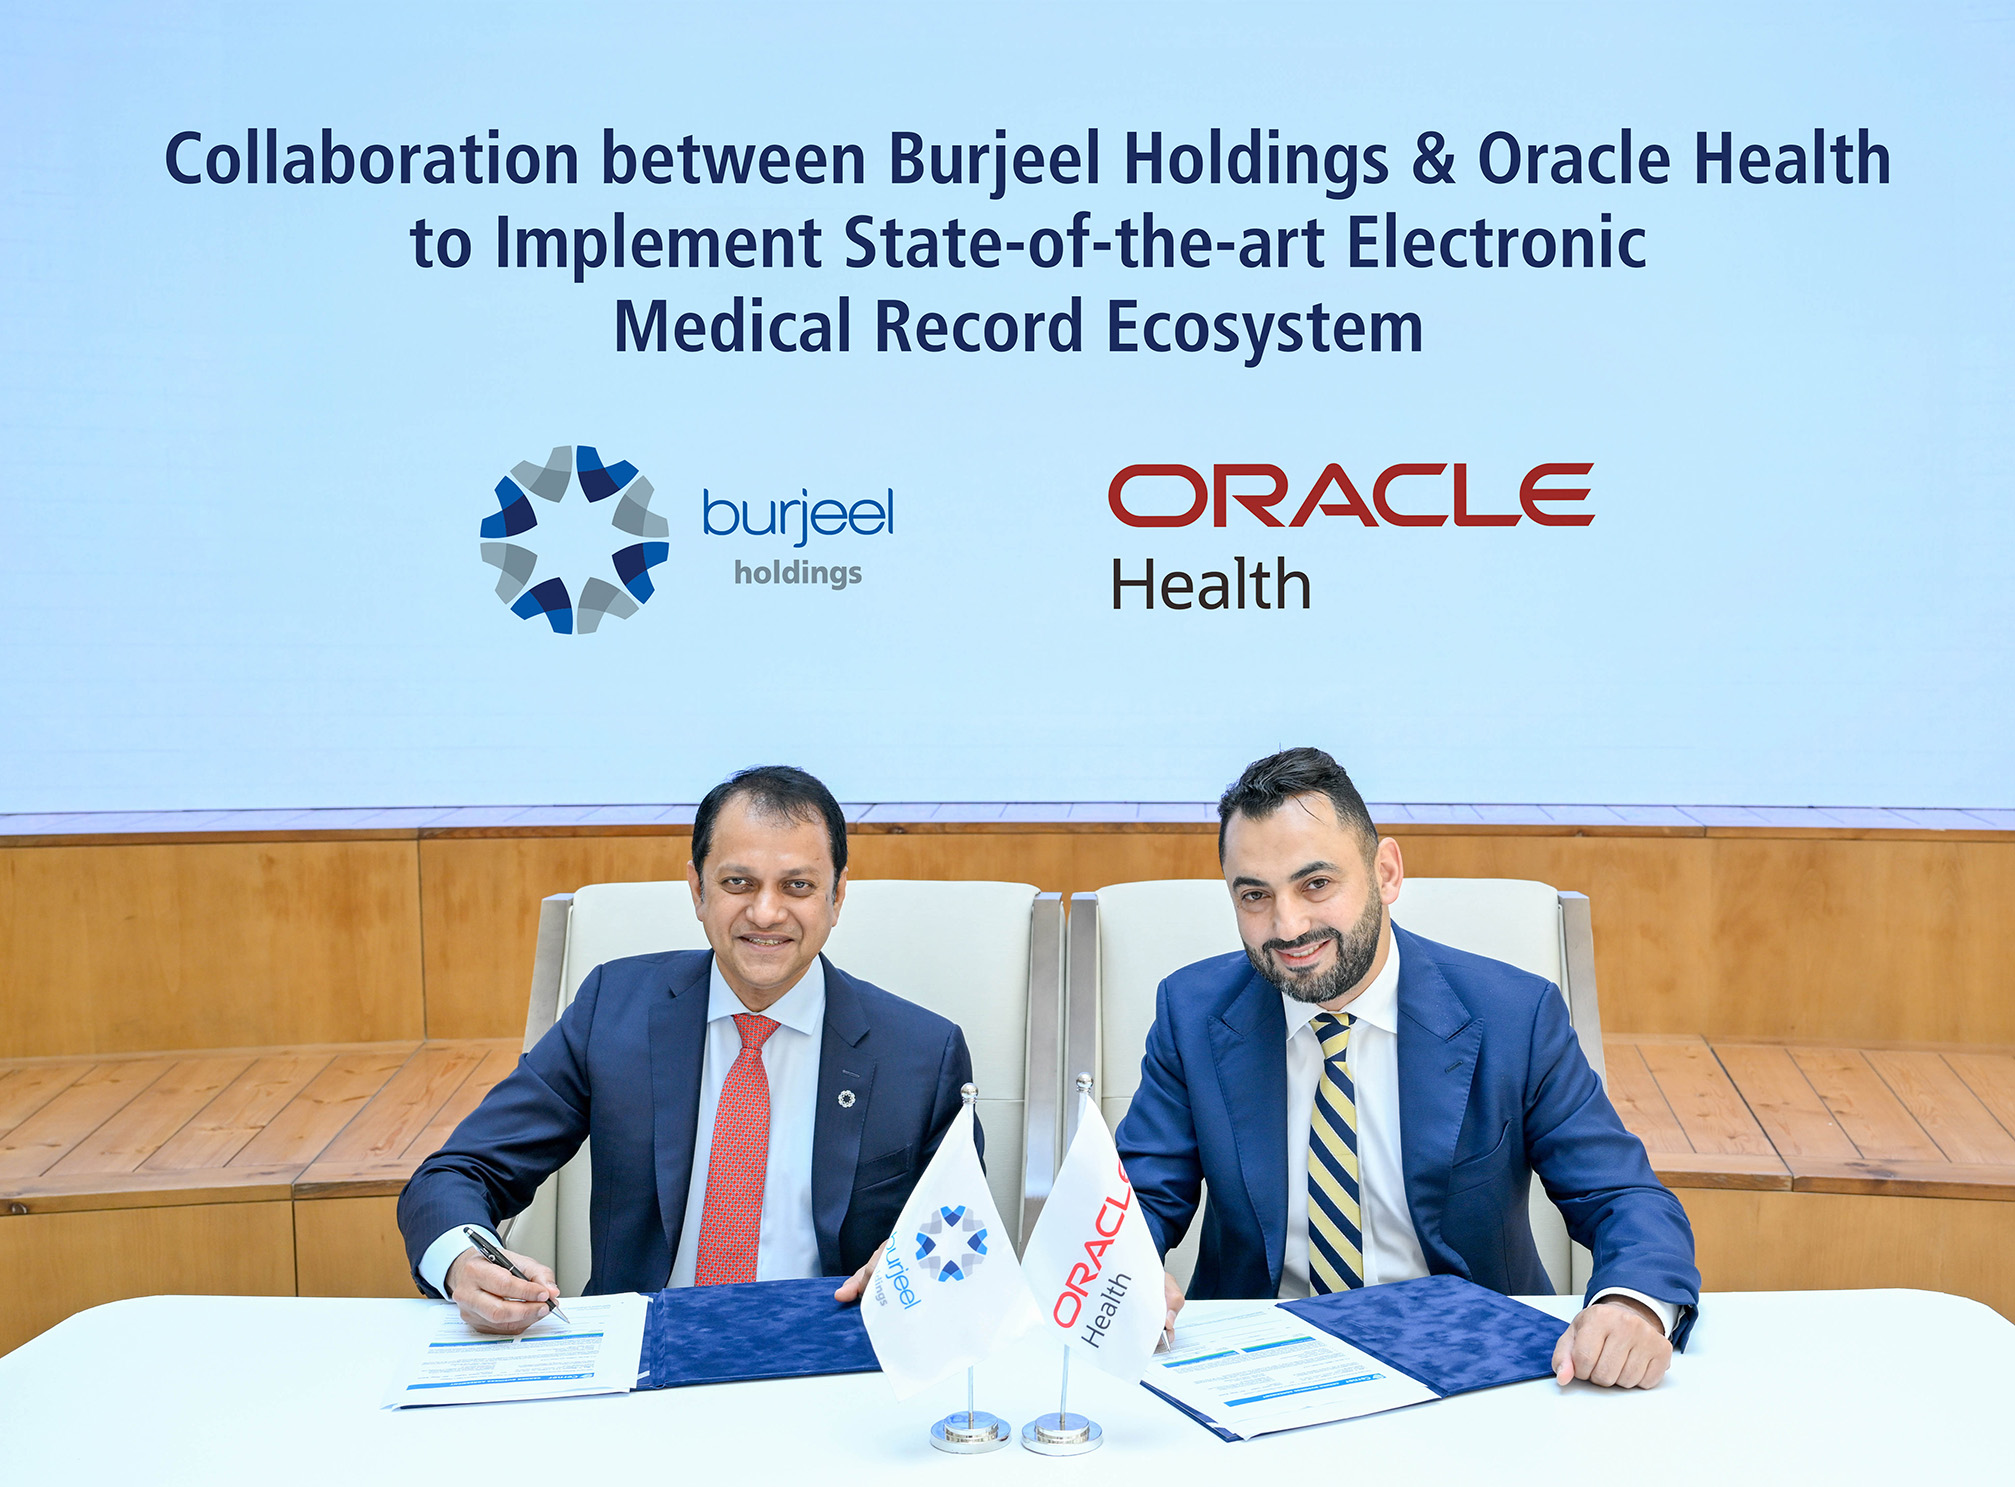 Burjeel Holdings PLC Awards Oracle Health AED 125 million Contract to Implement State-of-the-art Electronic Medical Record Ecosystem